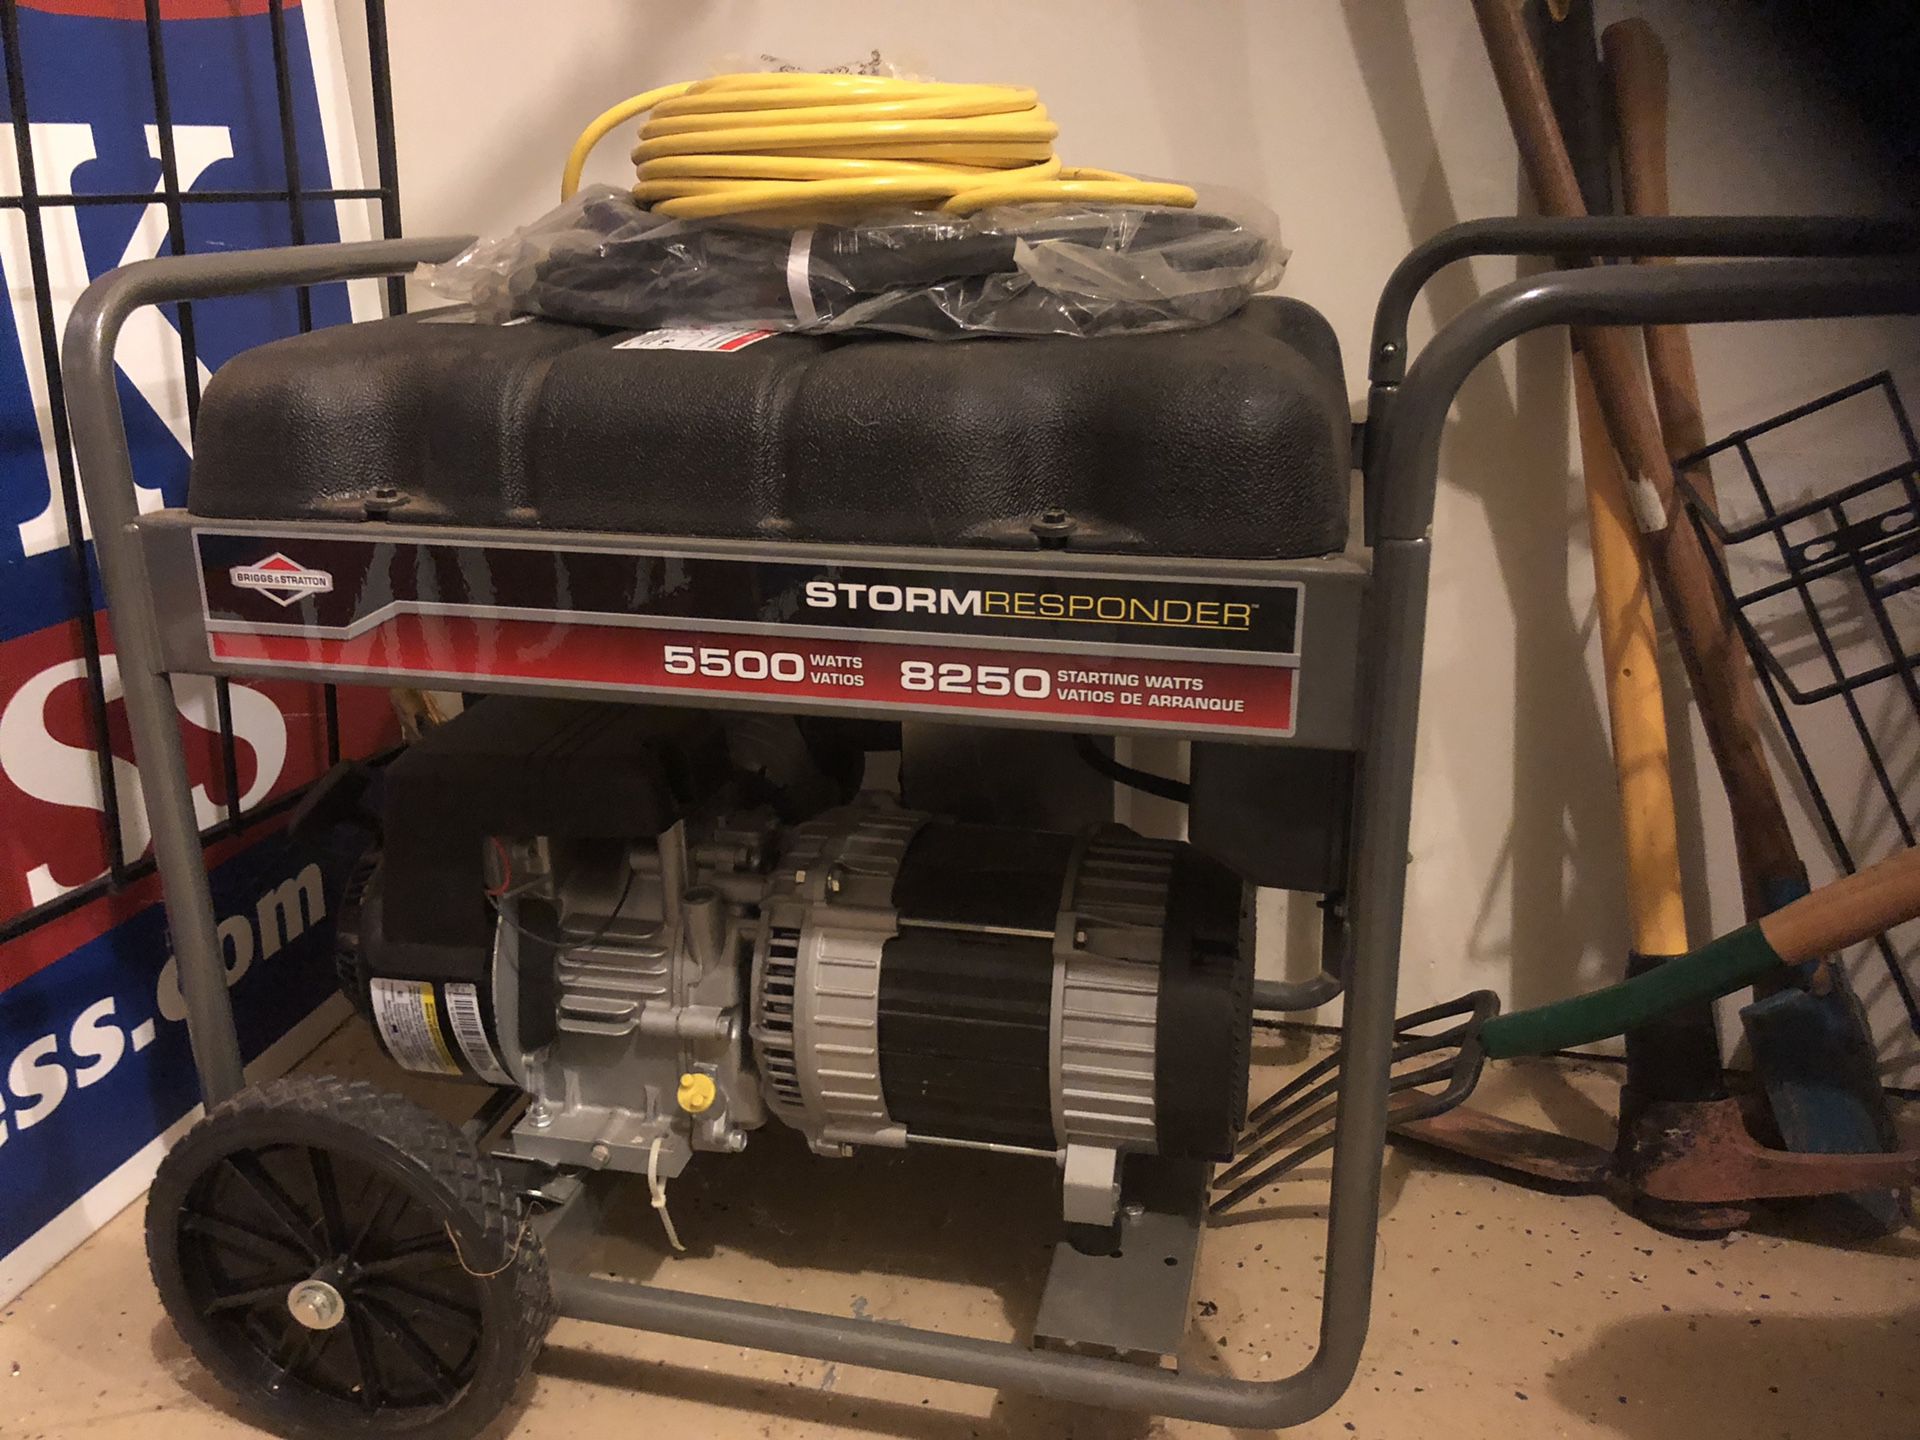 Generator - used once and purchased at $800.